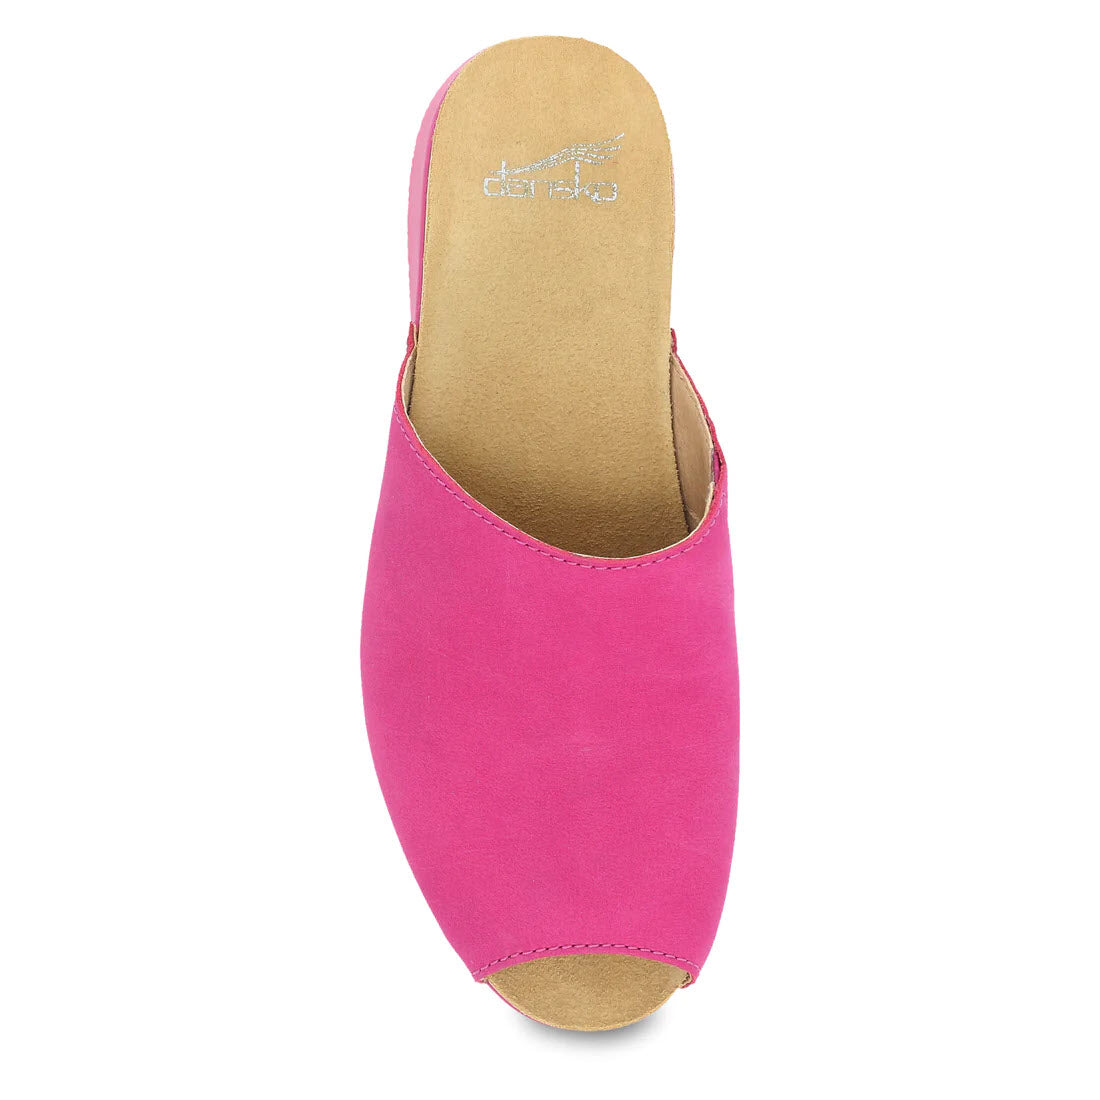 Top view of a vibrant pink Dansko Ravyn mule sandal with an open toe design and flat sole.